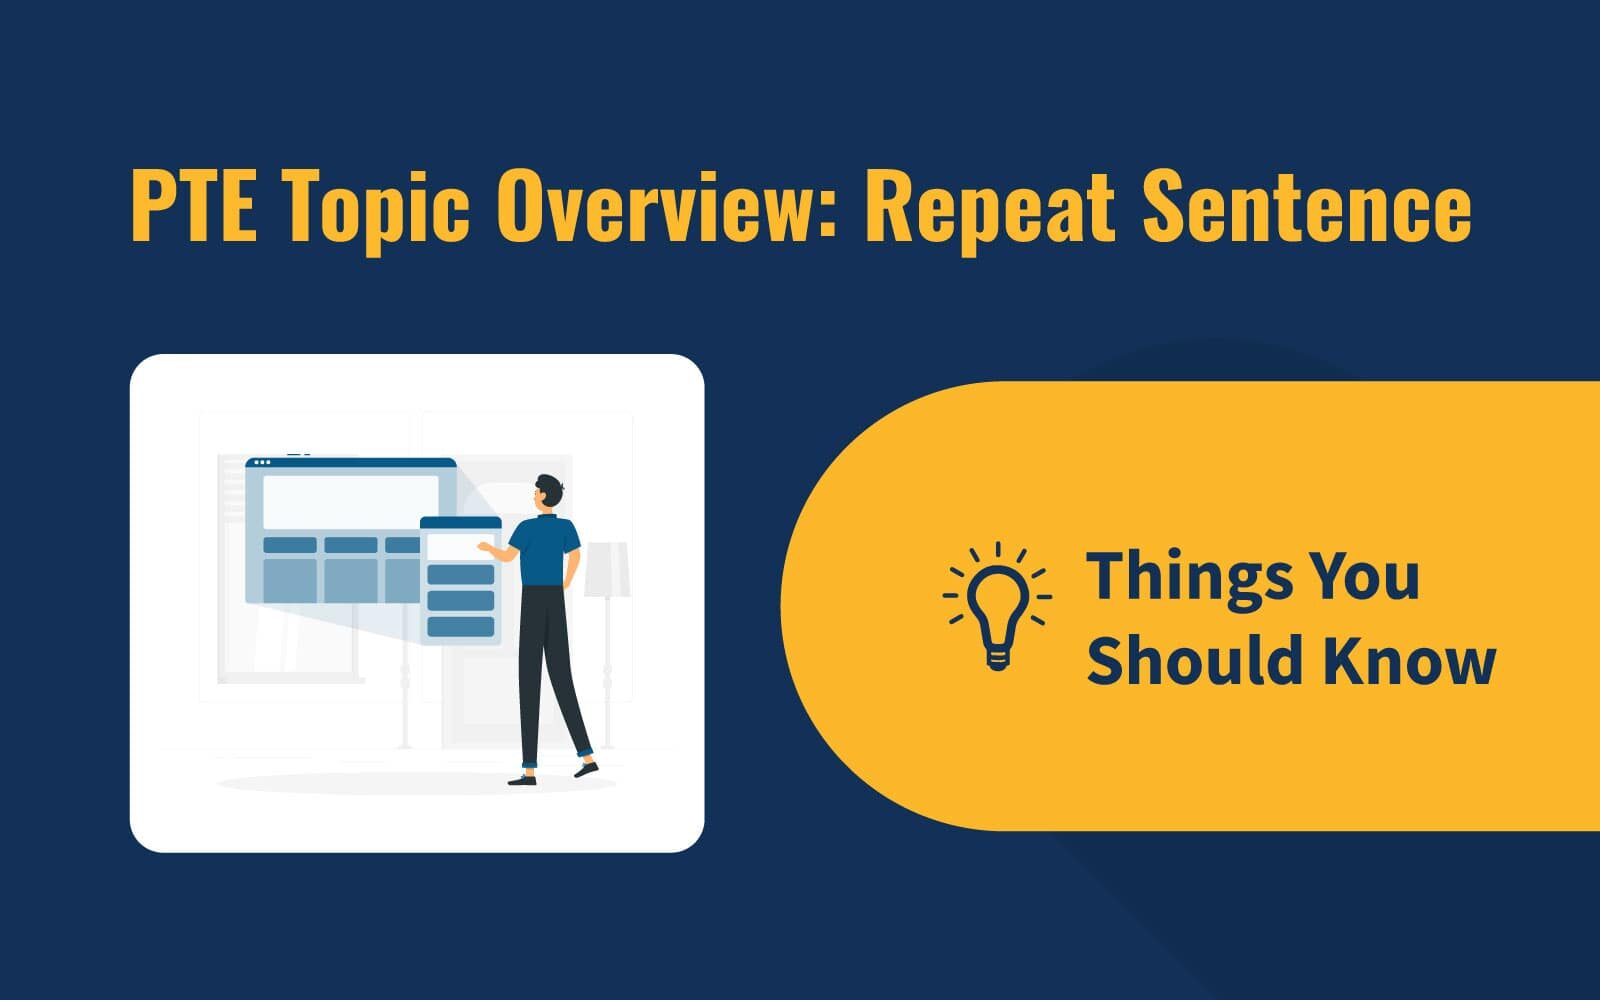 PTE Topic Overview: Repeat Sentence